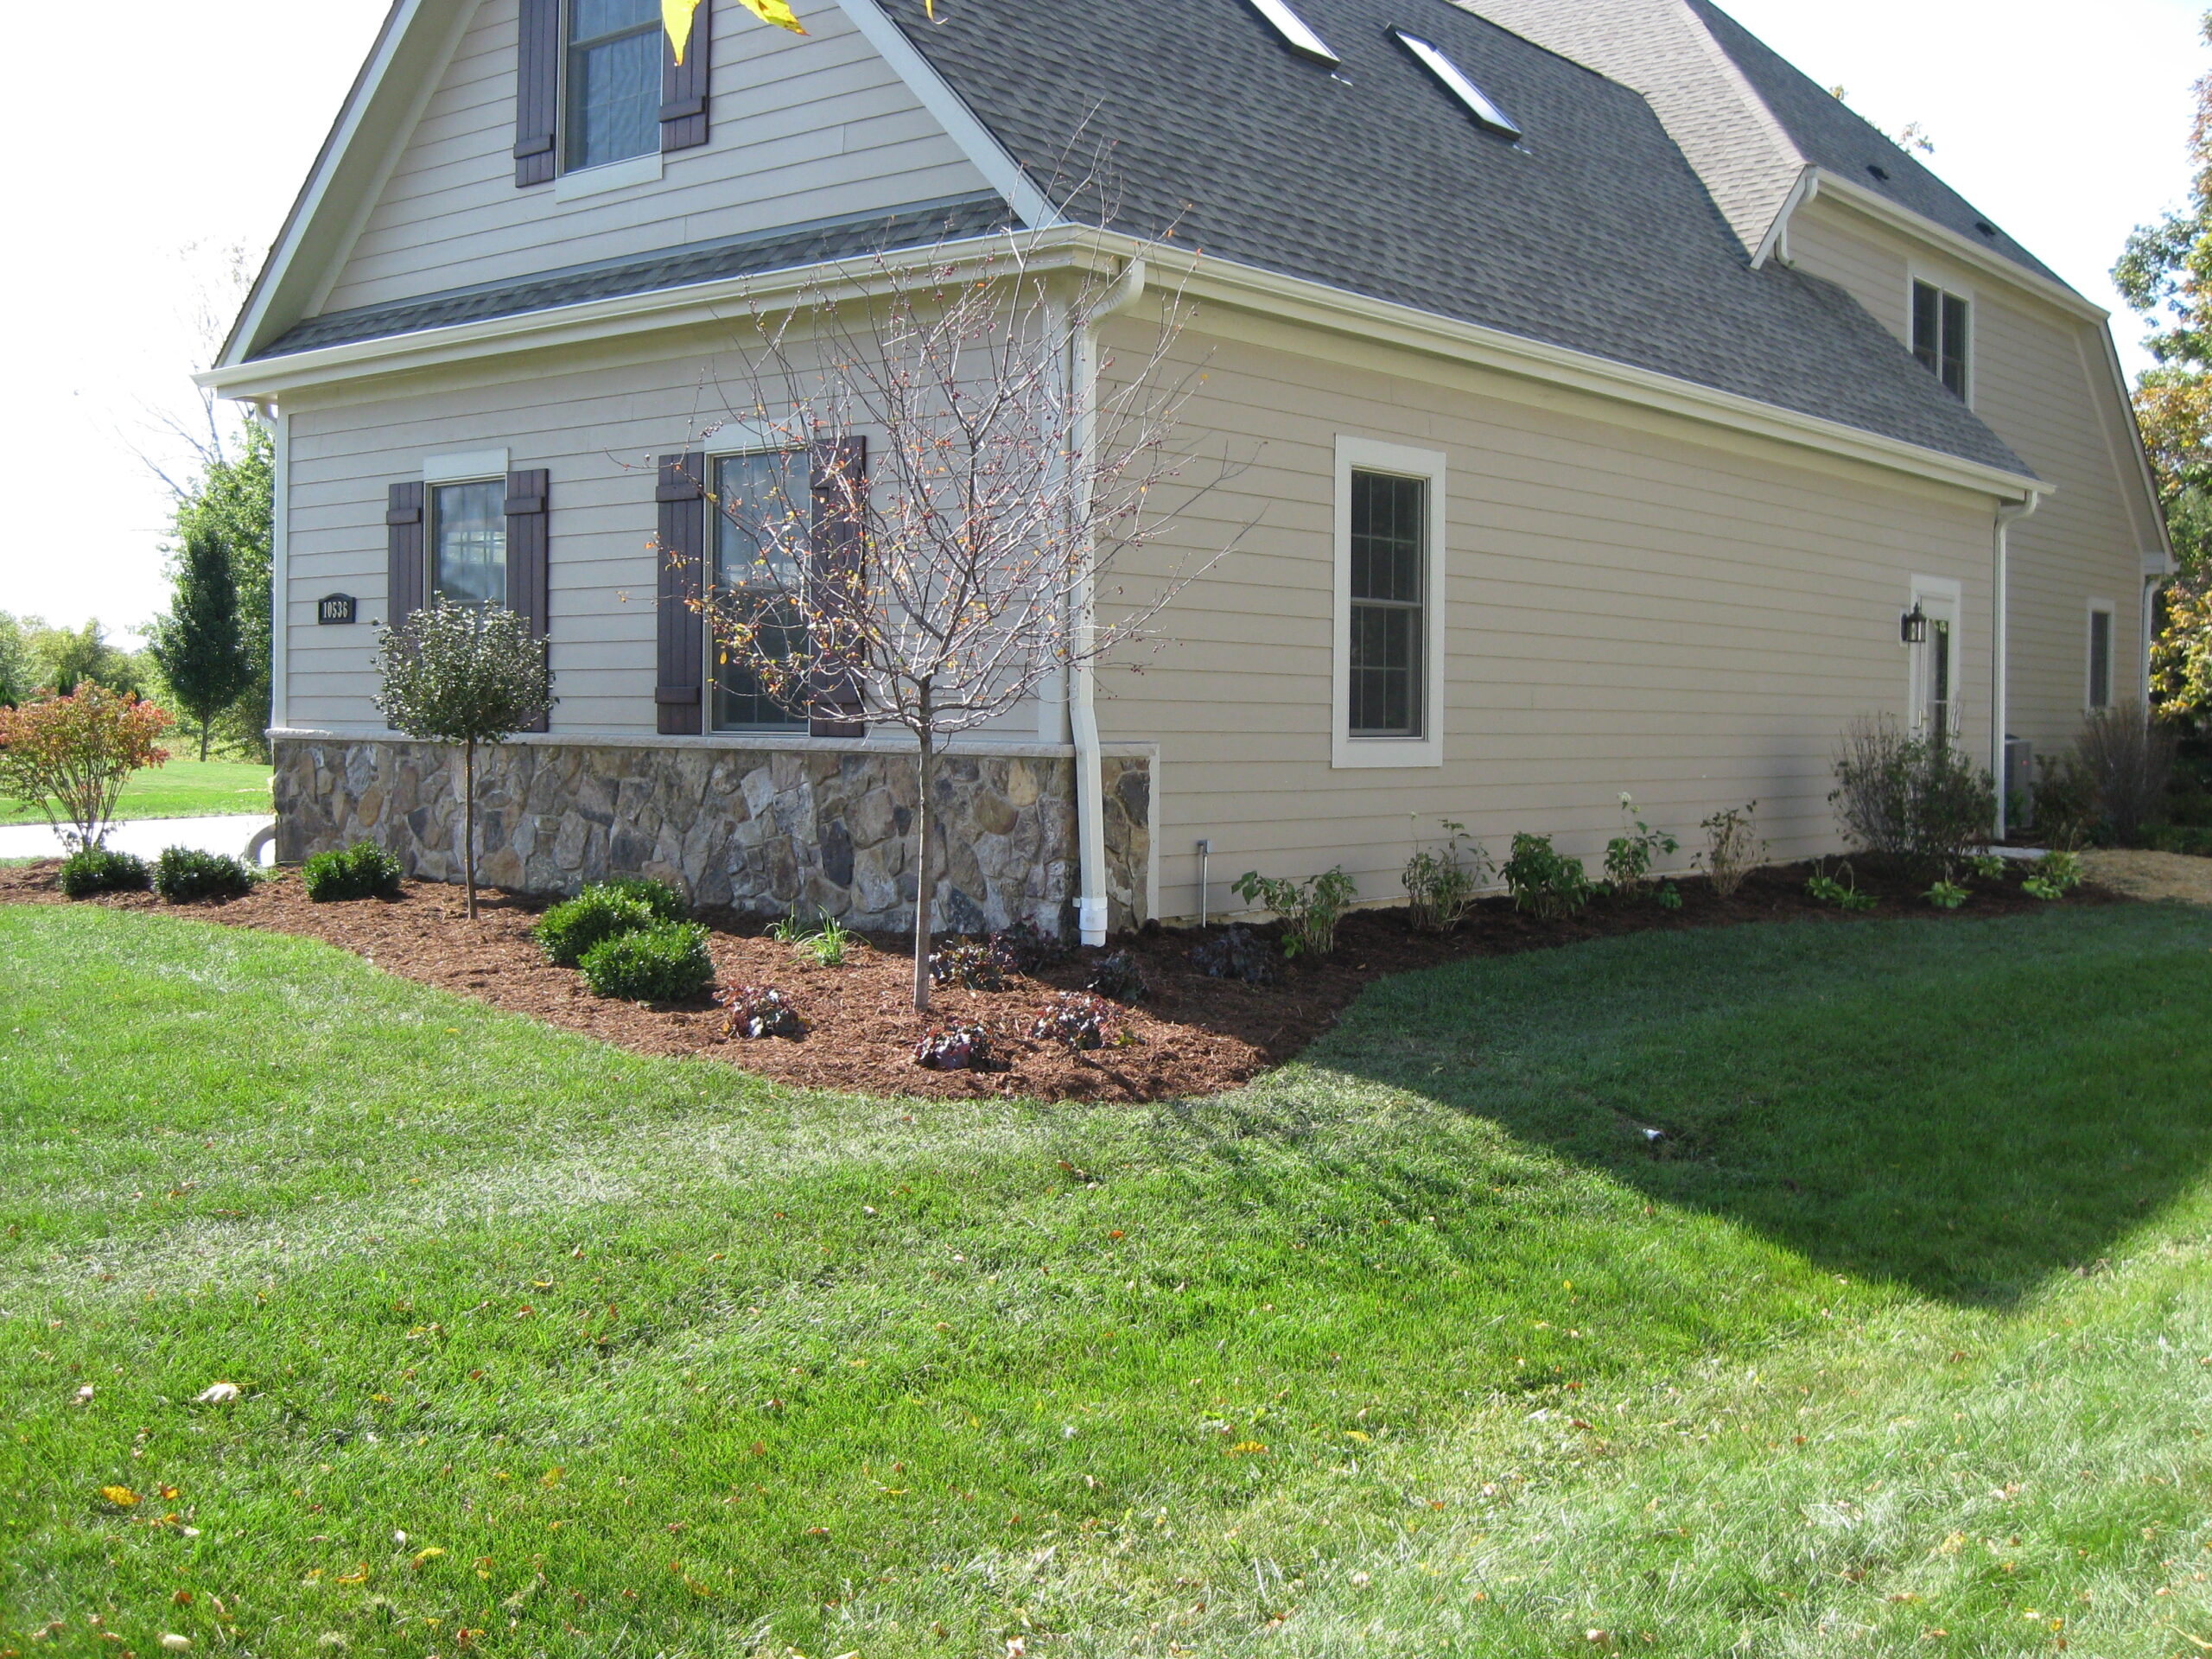 Yard Landscaping After Image